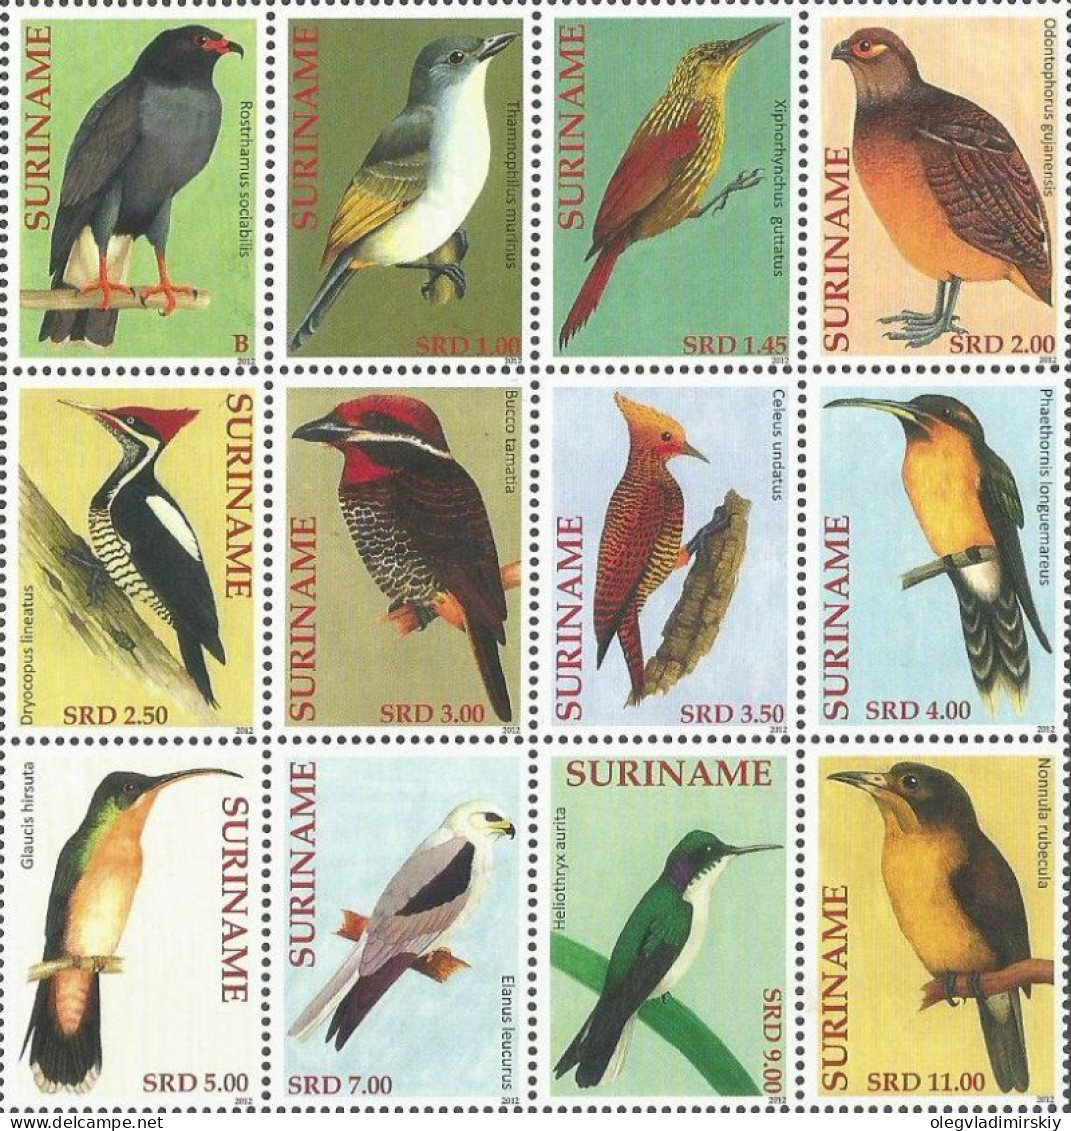 Suriname Surinam 2012 Tropical Forest Birds Set Of 12 Stamps In Block 3x4 MNH - Passereaux